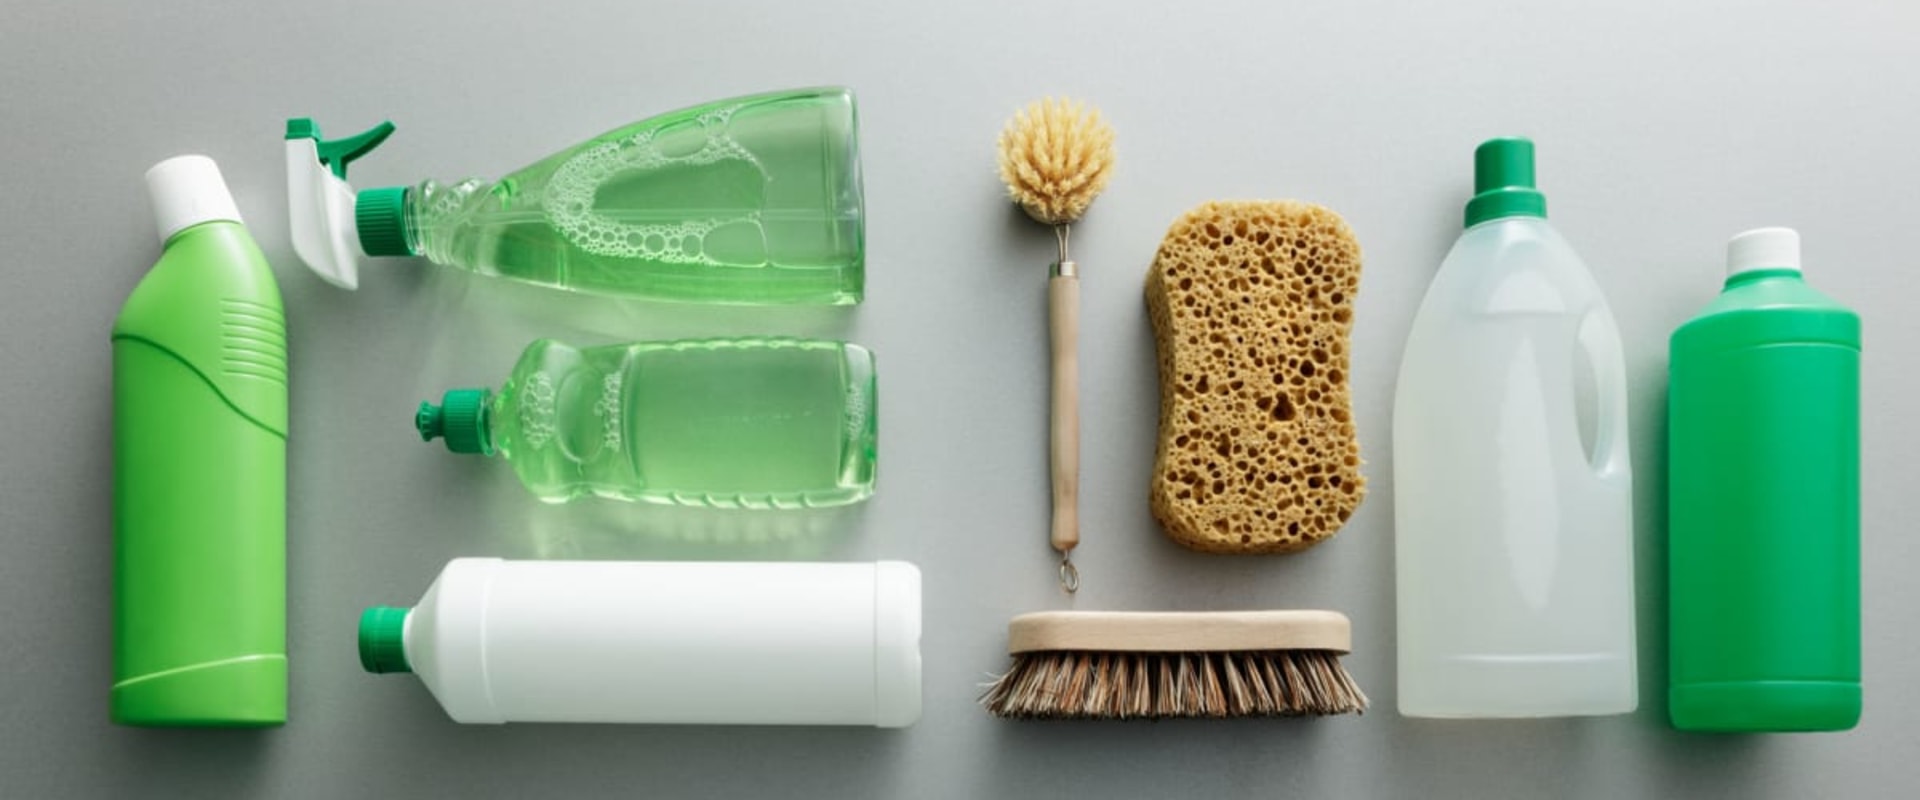 Are there any eco-friendly cleaning products i can use in my house?